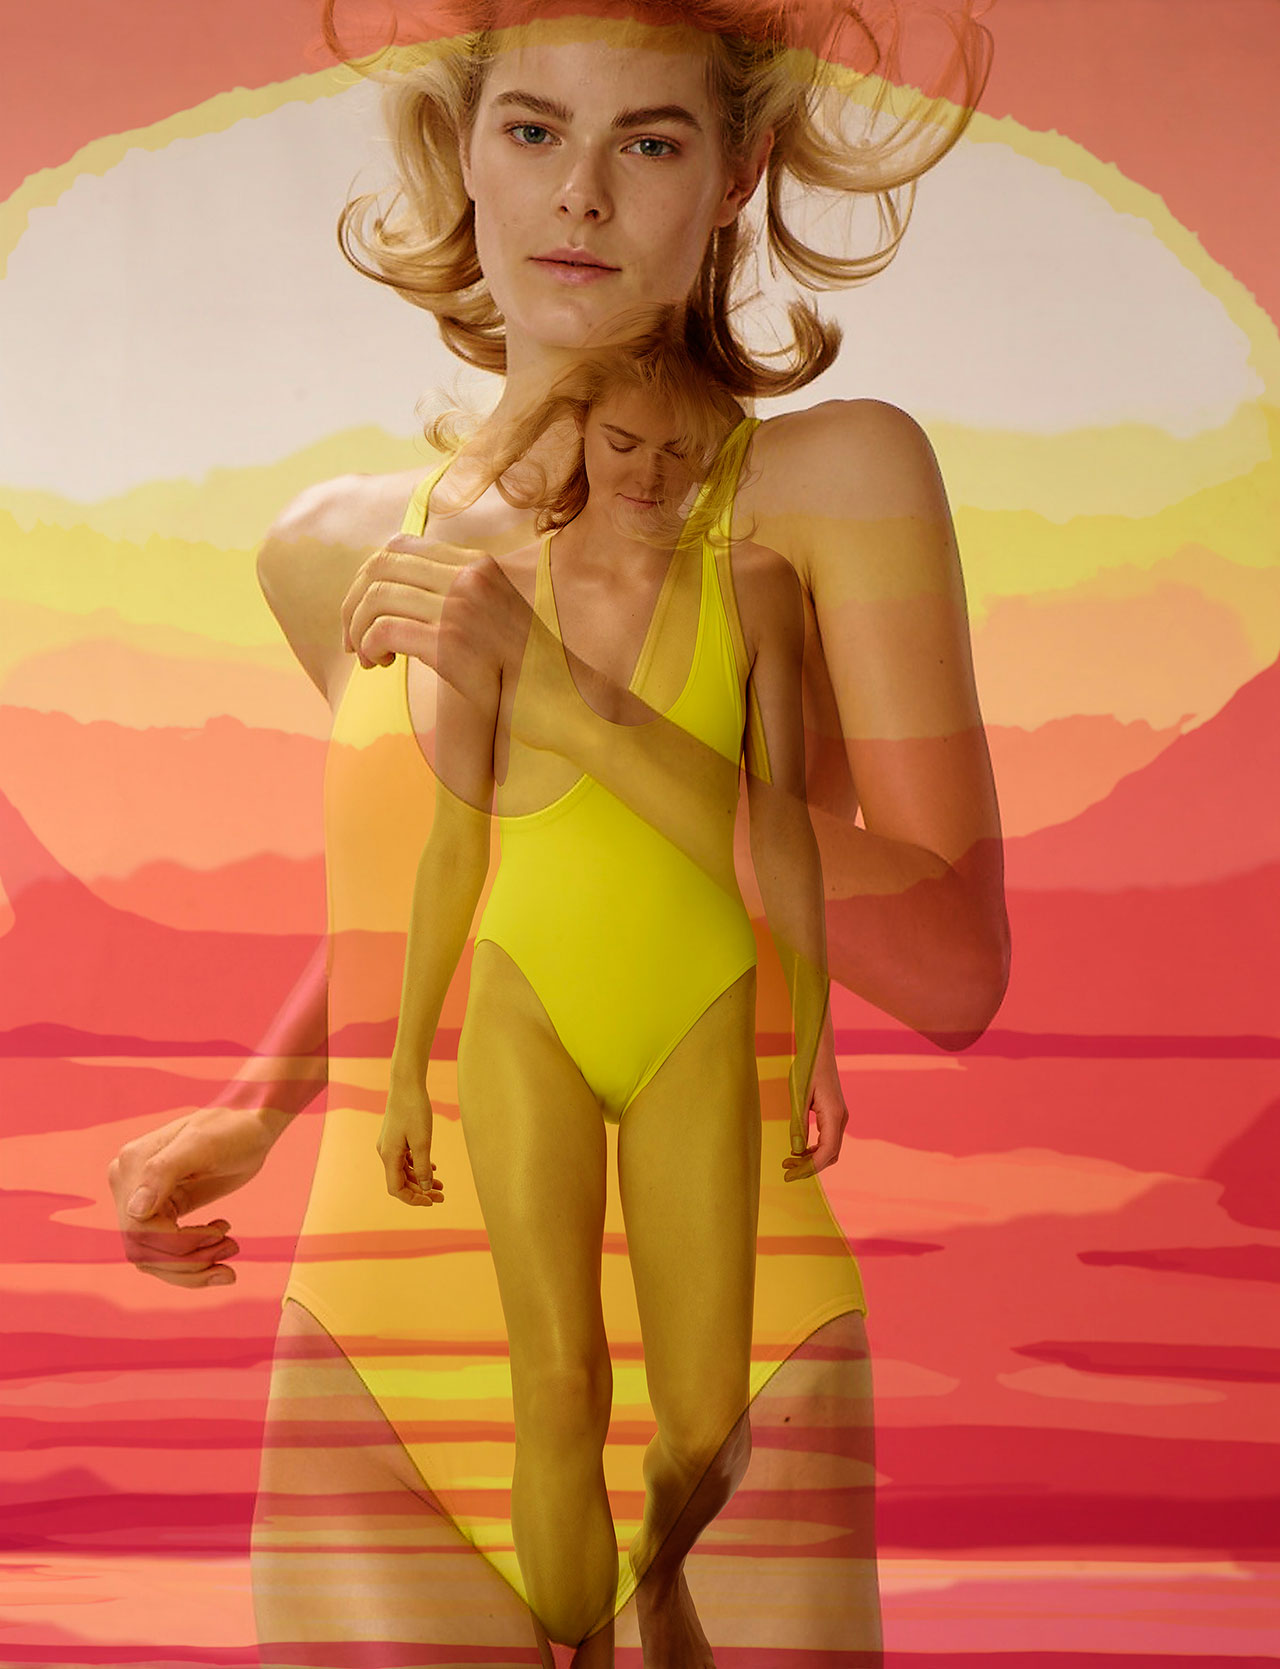 Roe Ethridge (b.1969), Double Jess Gold, 2015, dye sublimation print, 53 x 40 in. (134.6 x 101.6 cm). Image Courtesy of the Artist and Andrew Kreps Gallery, New York.